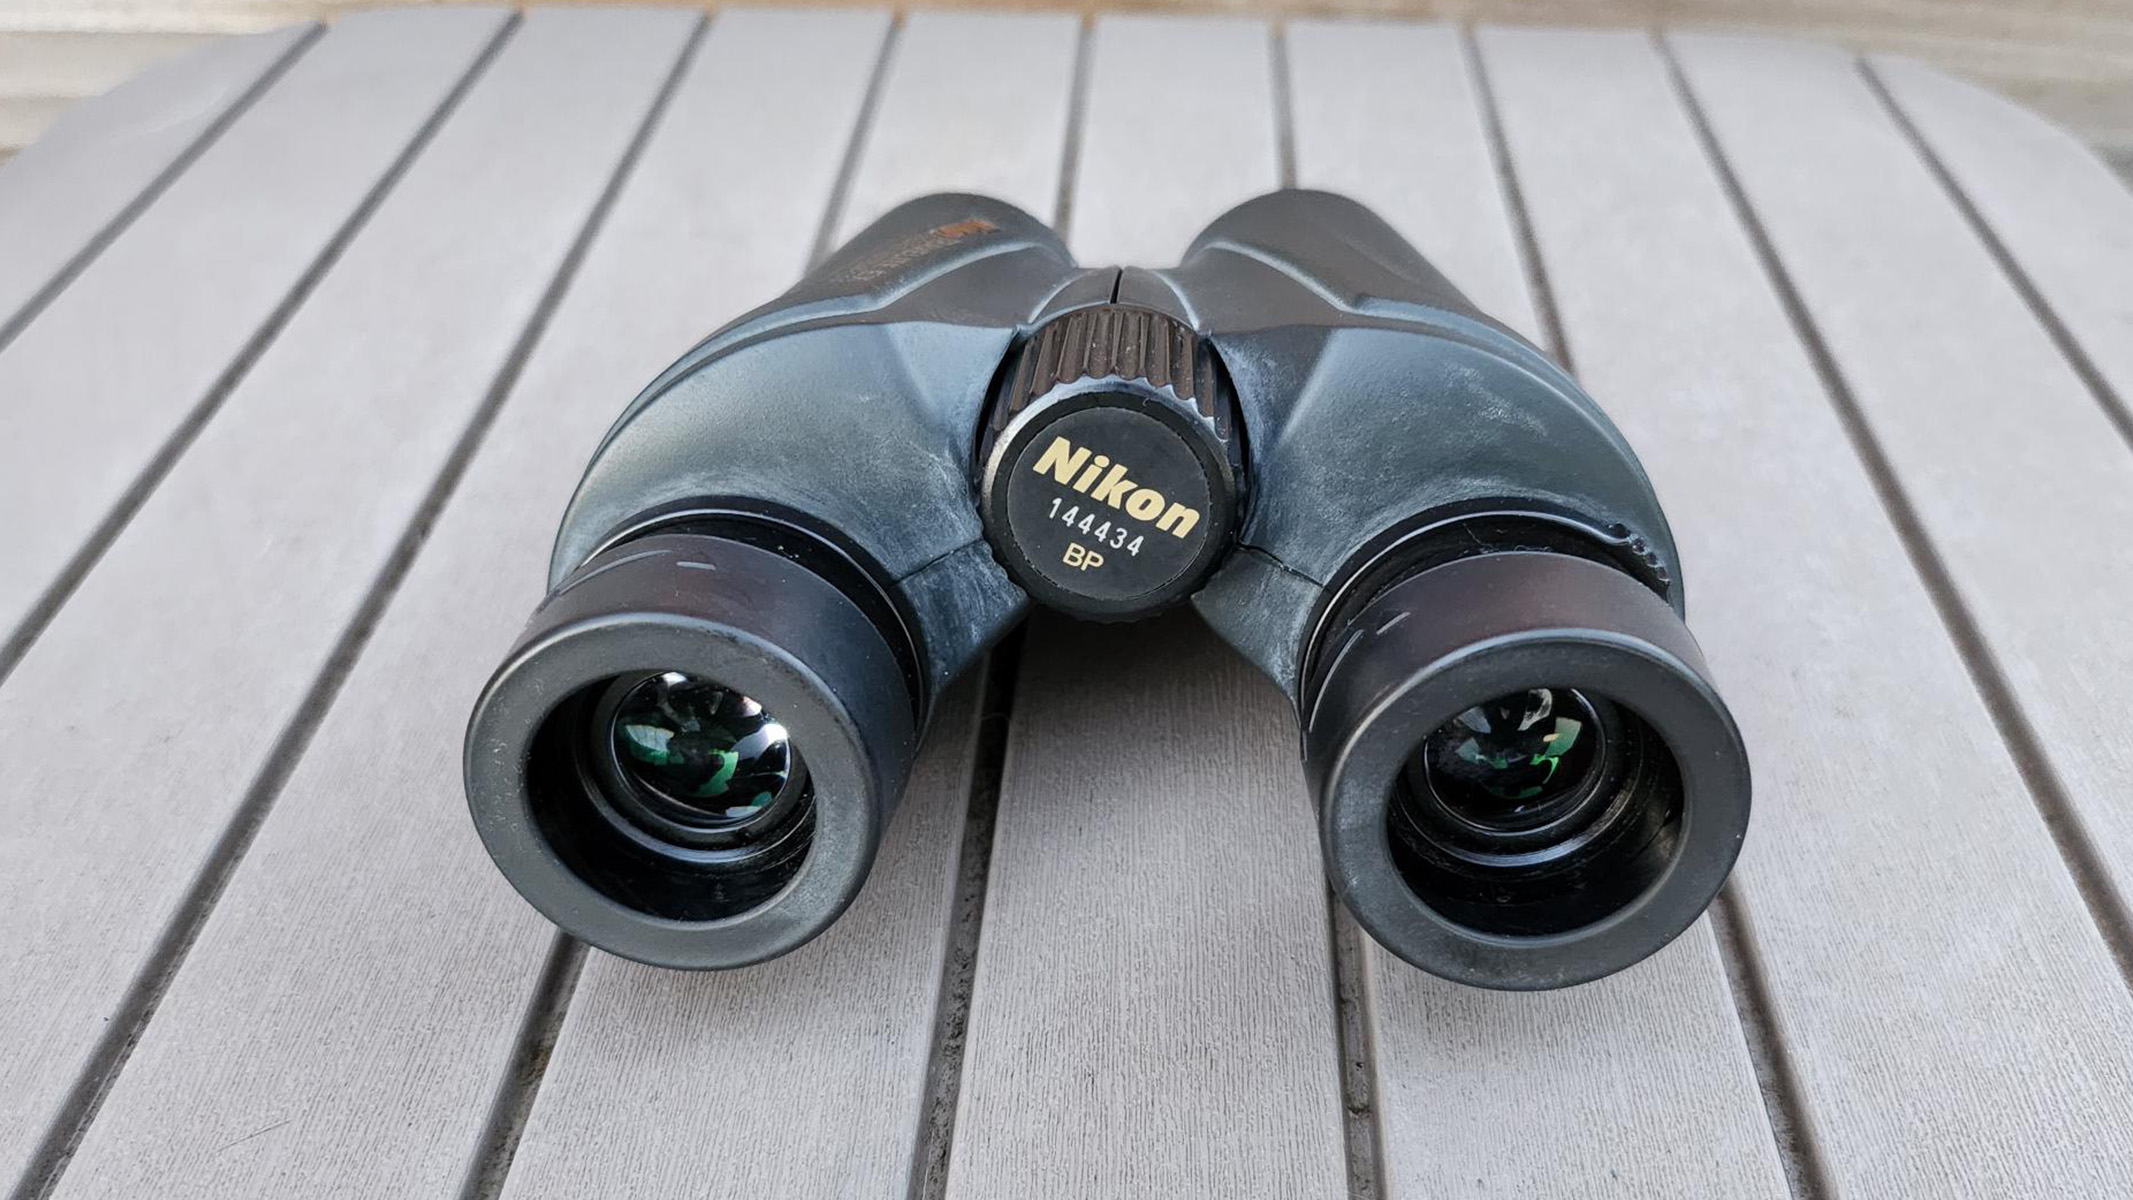 A photo showing the small 25mm aperture of the Nikon Travelite EX 8x25 binoculars